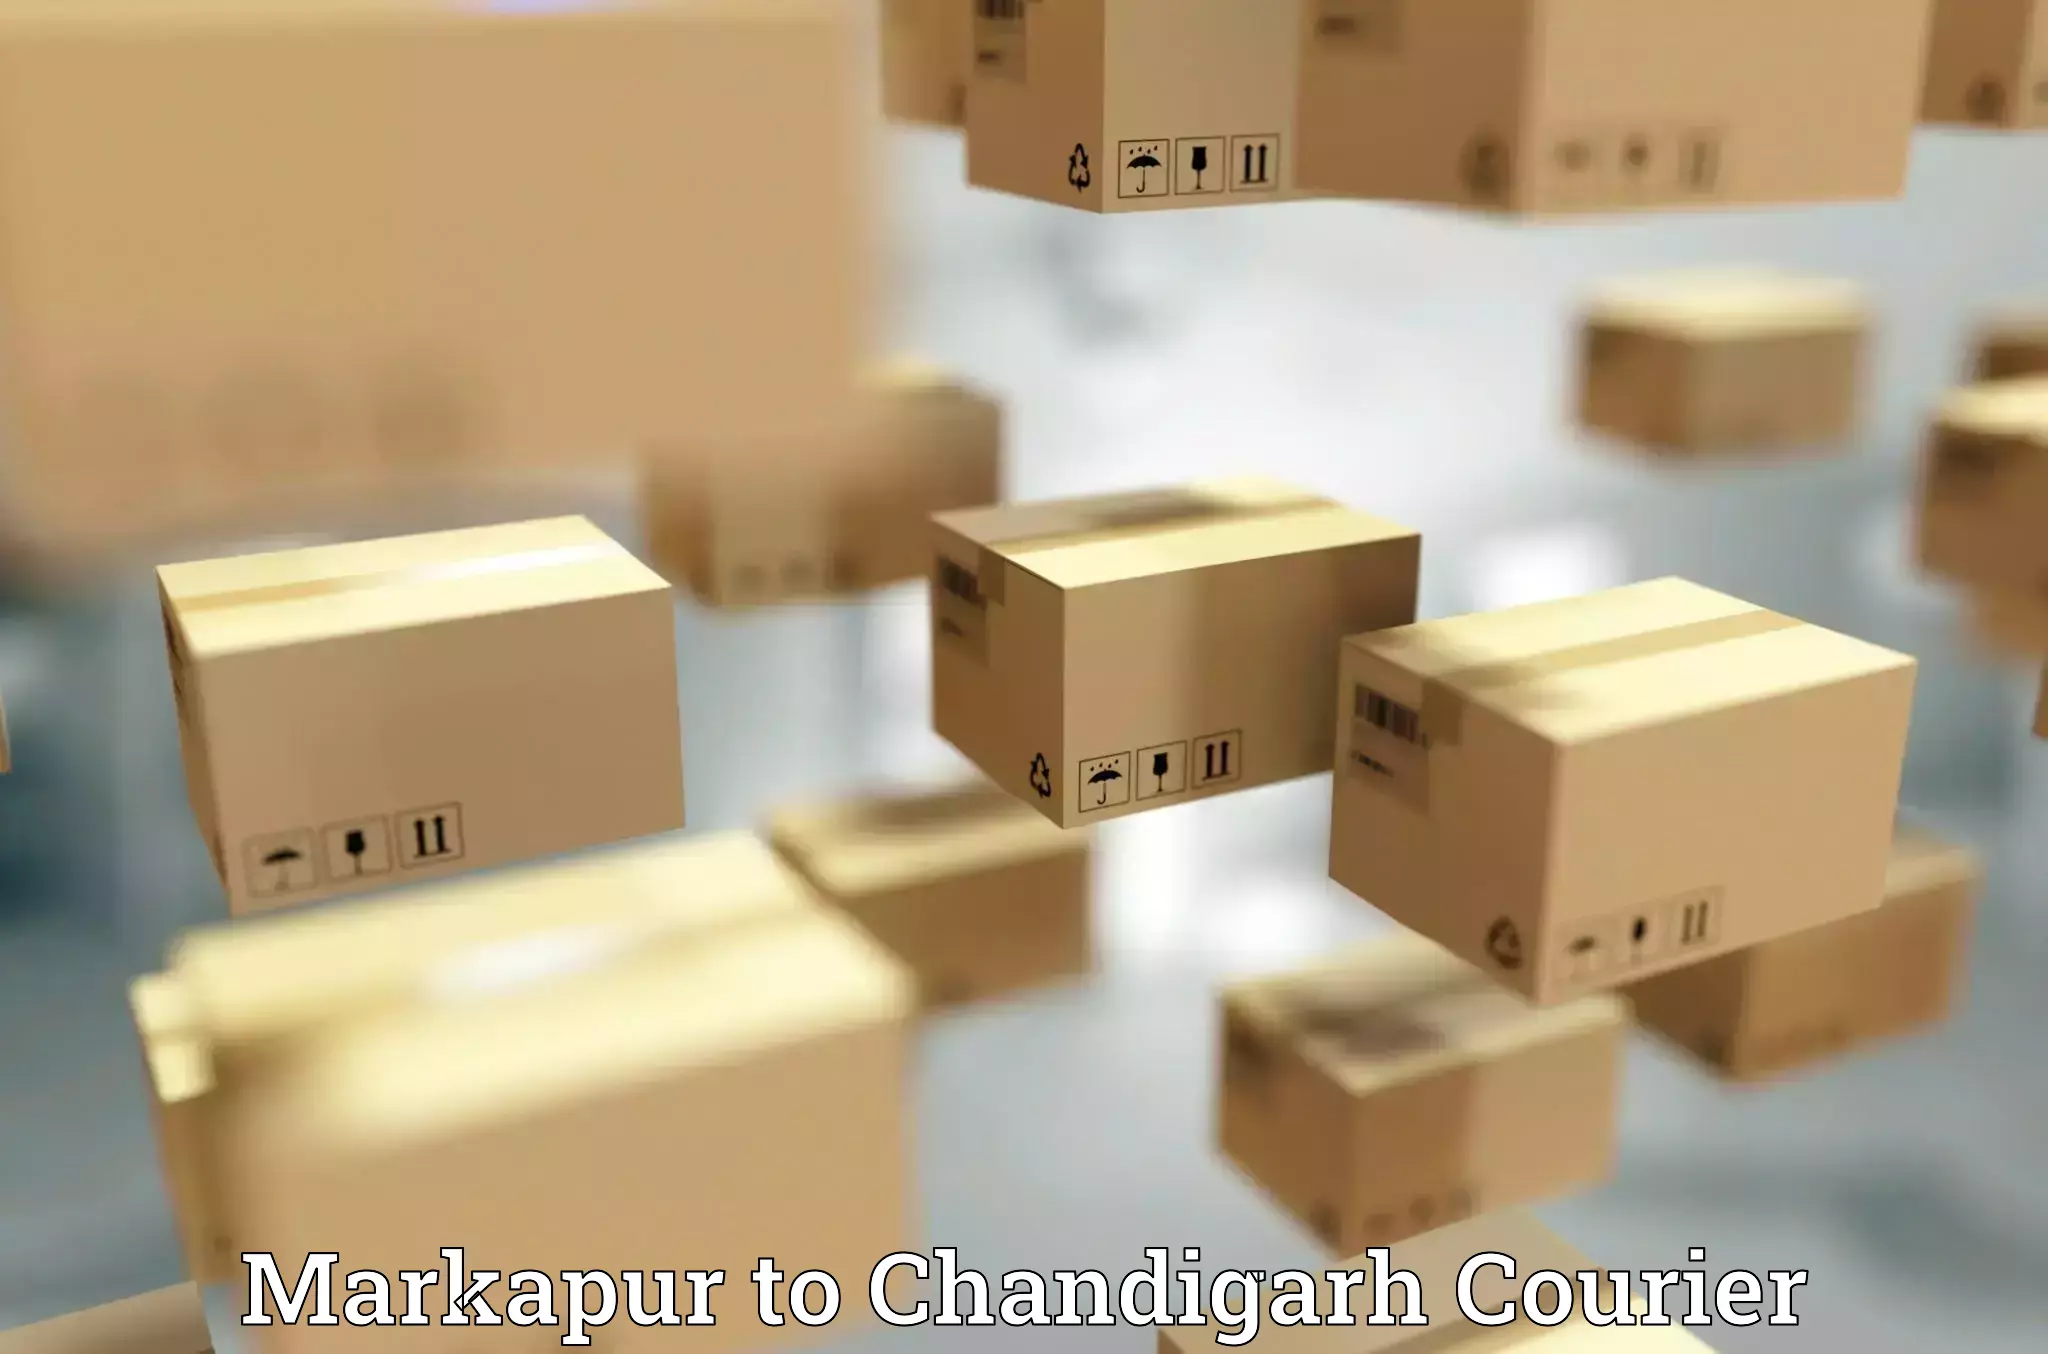 24-hour courier service Markapur to Panjab University Chandigarh